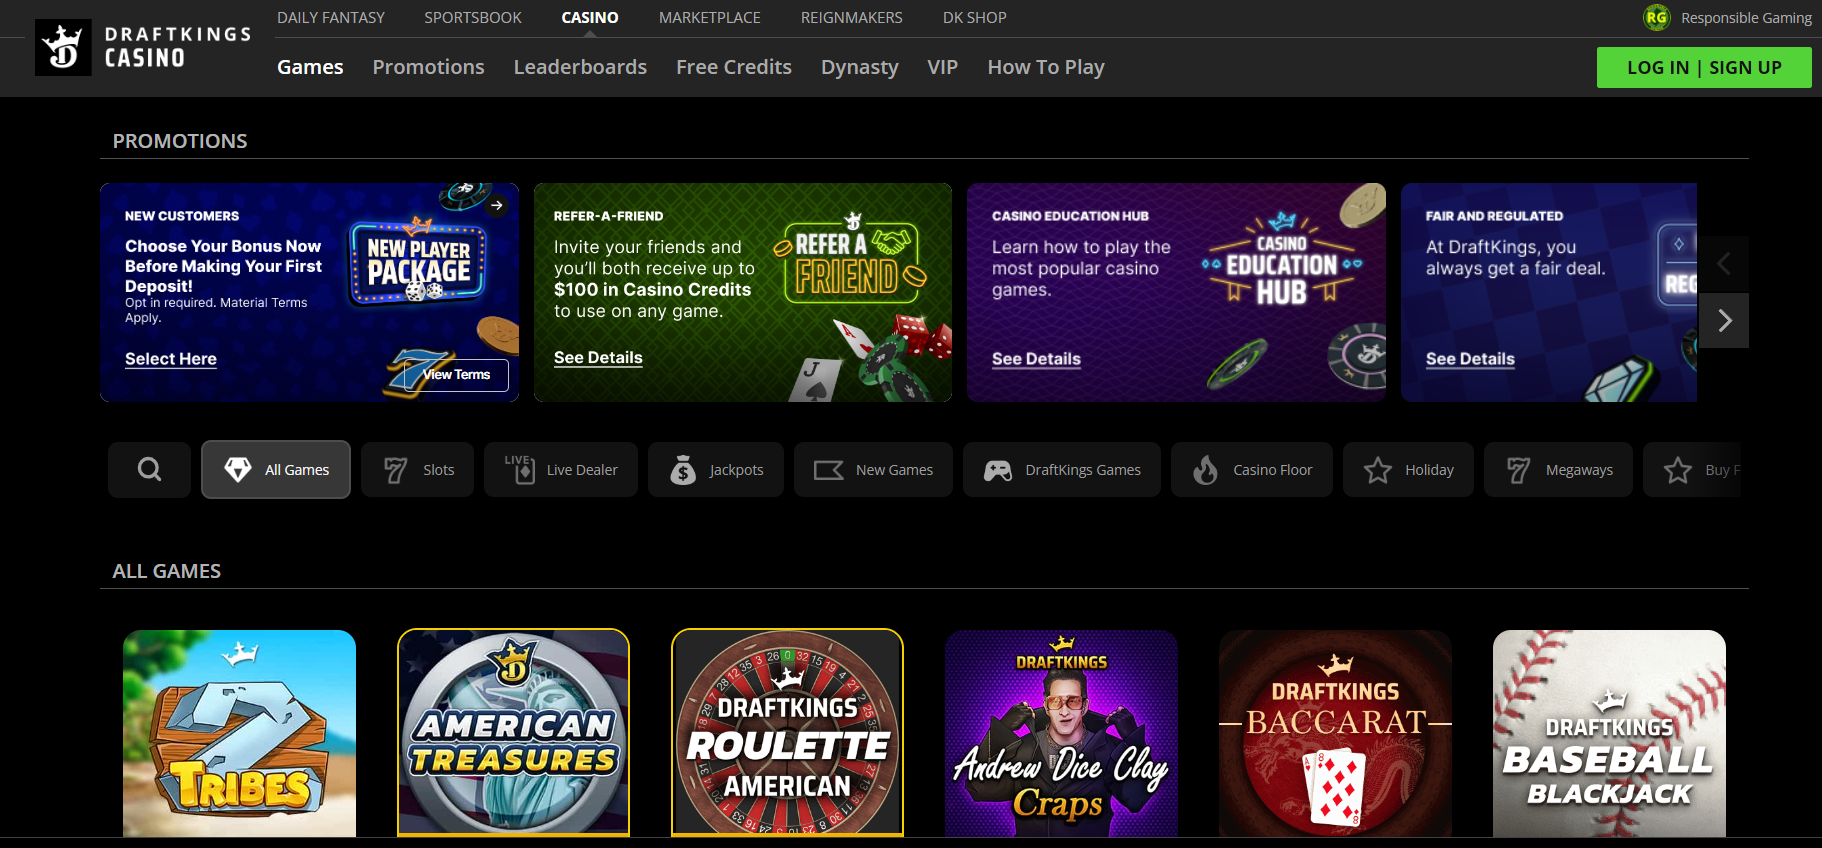 While Famous for DFS and Sports Betting DraftKings also Offers One of the Top Casino Experiences in the US